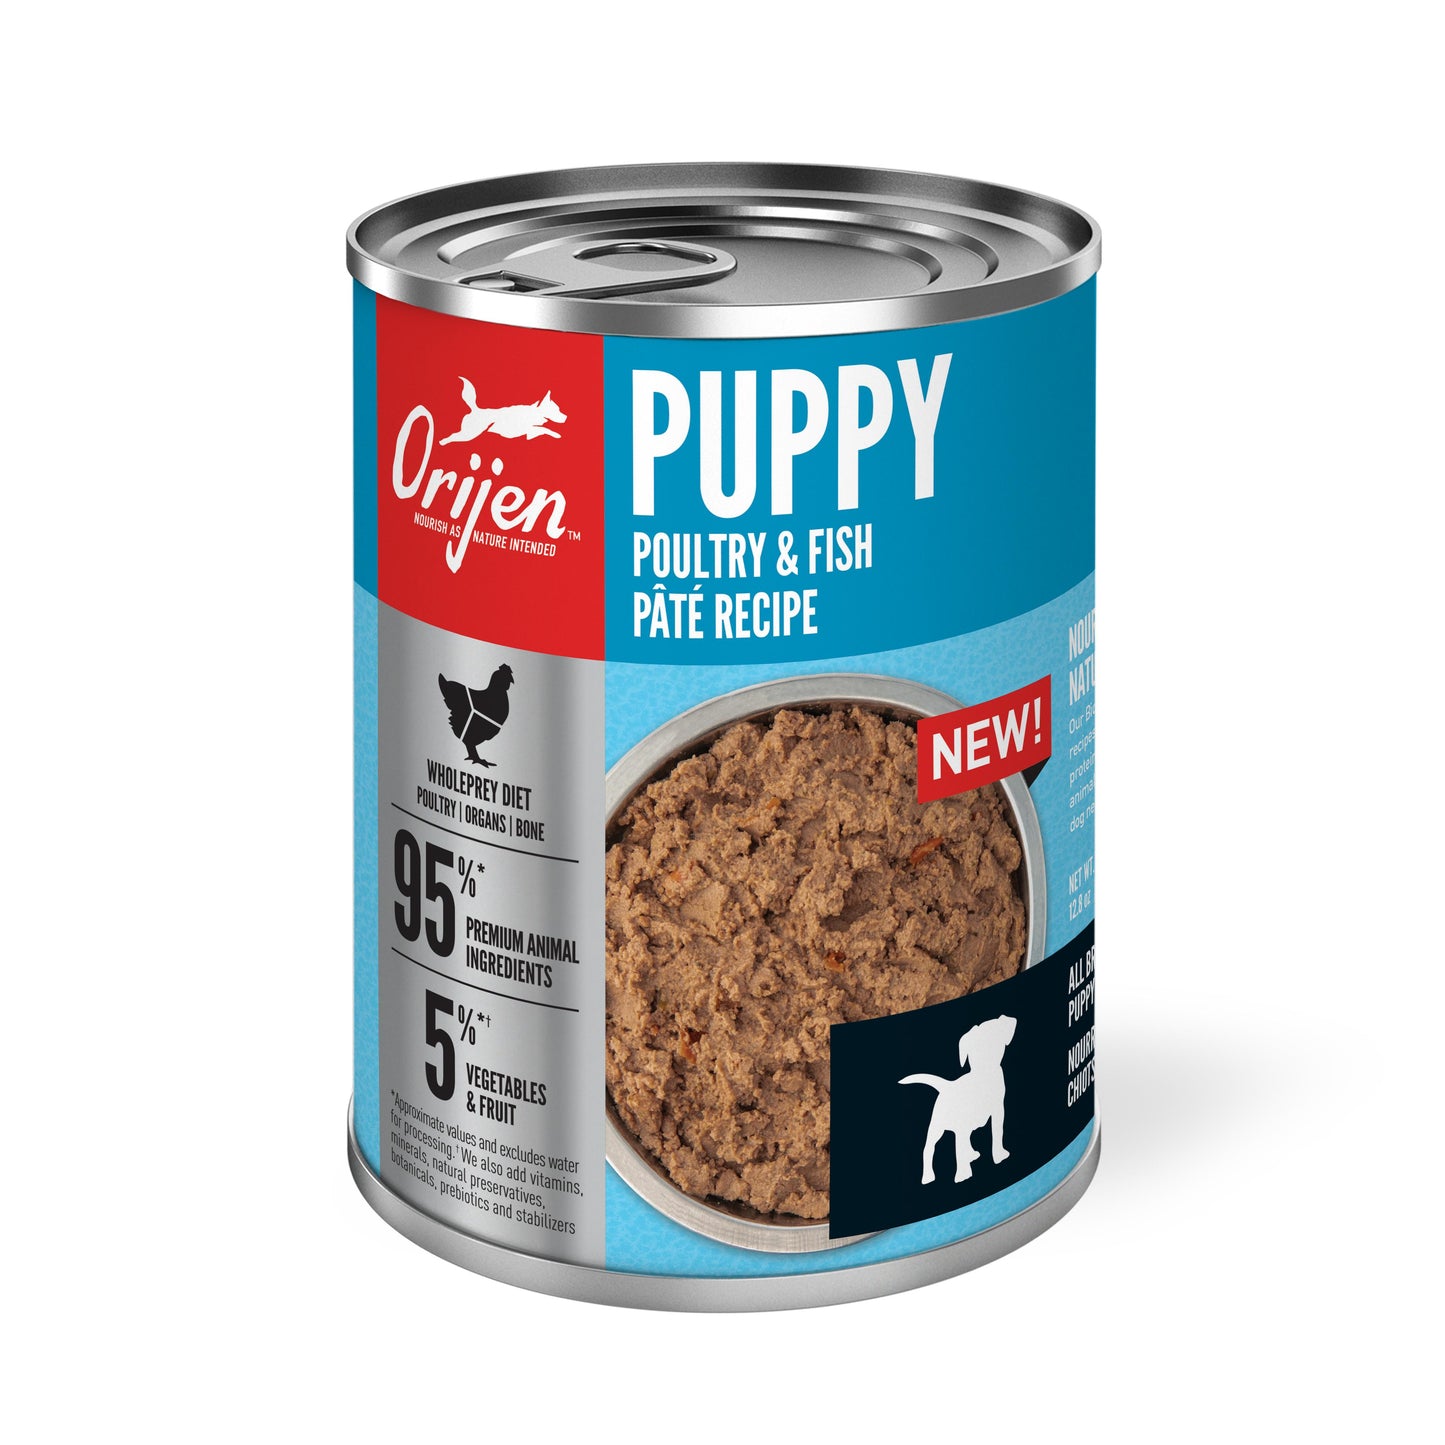 Orijen Premium Canned Puppy Food | Poultry & Fish Pate Recipe | 12.8 oz. Can